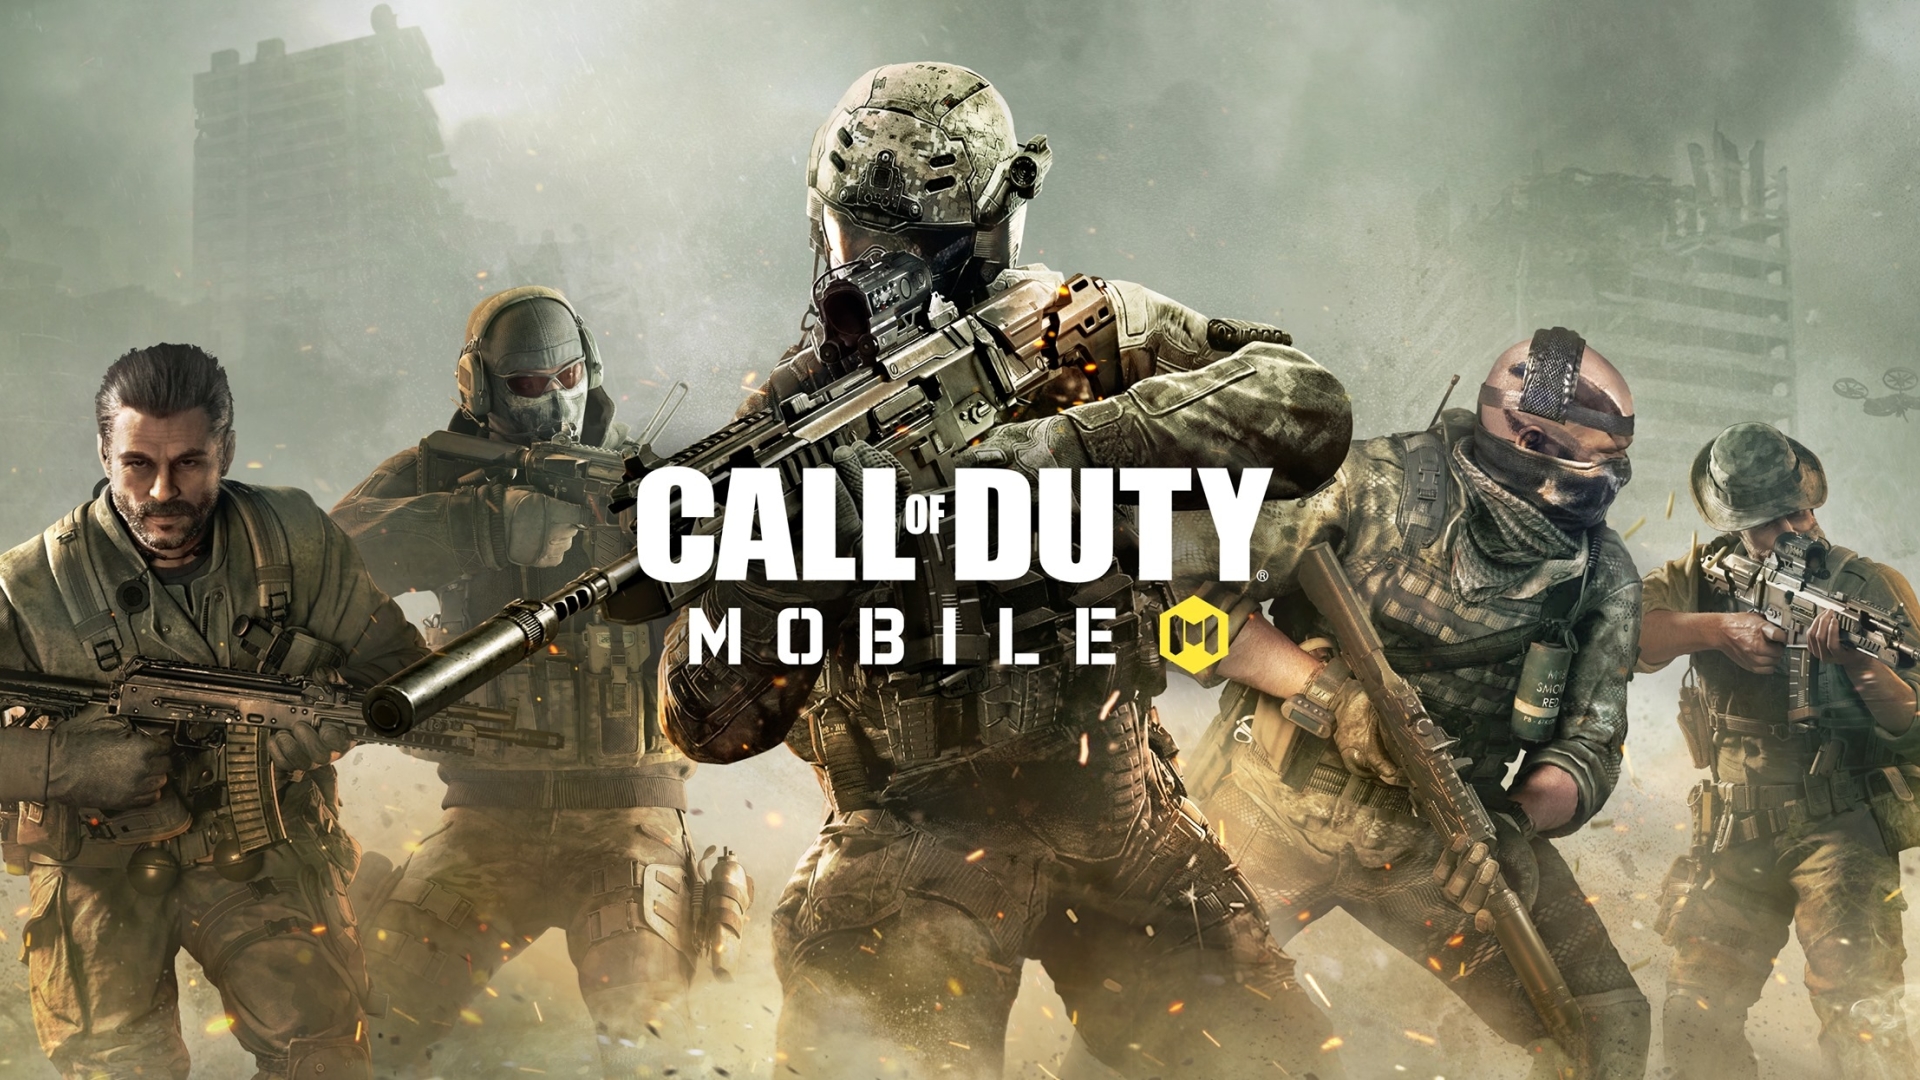 Call of Duty: Mobile has been removed from the Apple App Store